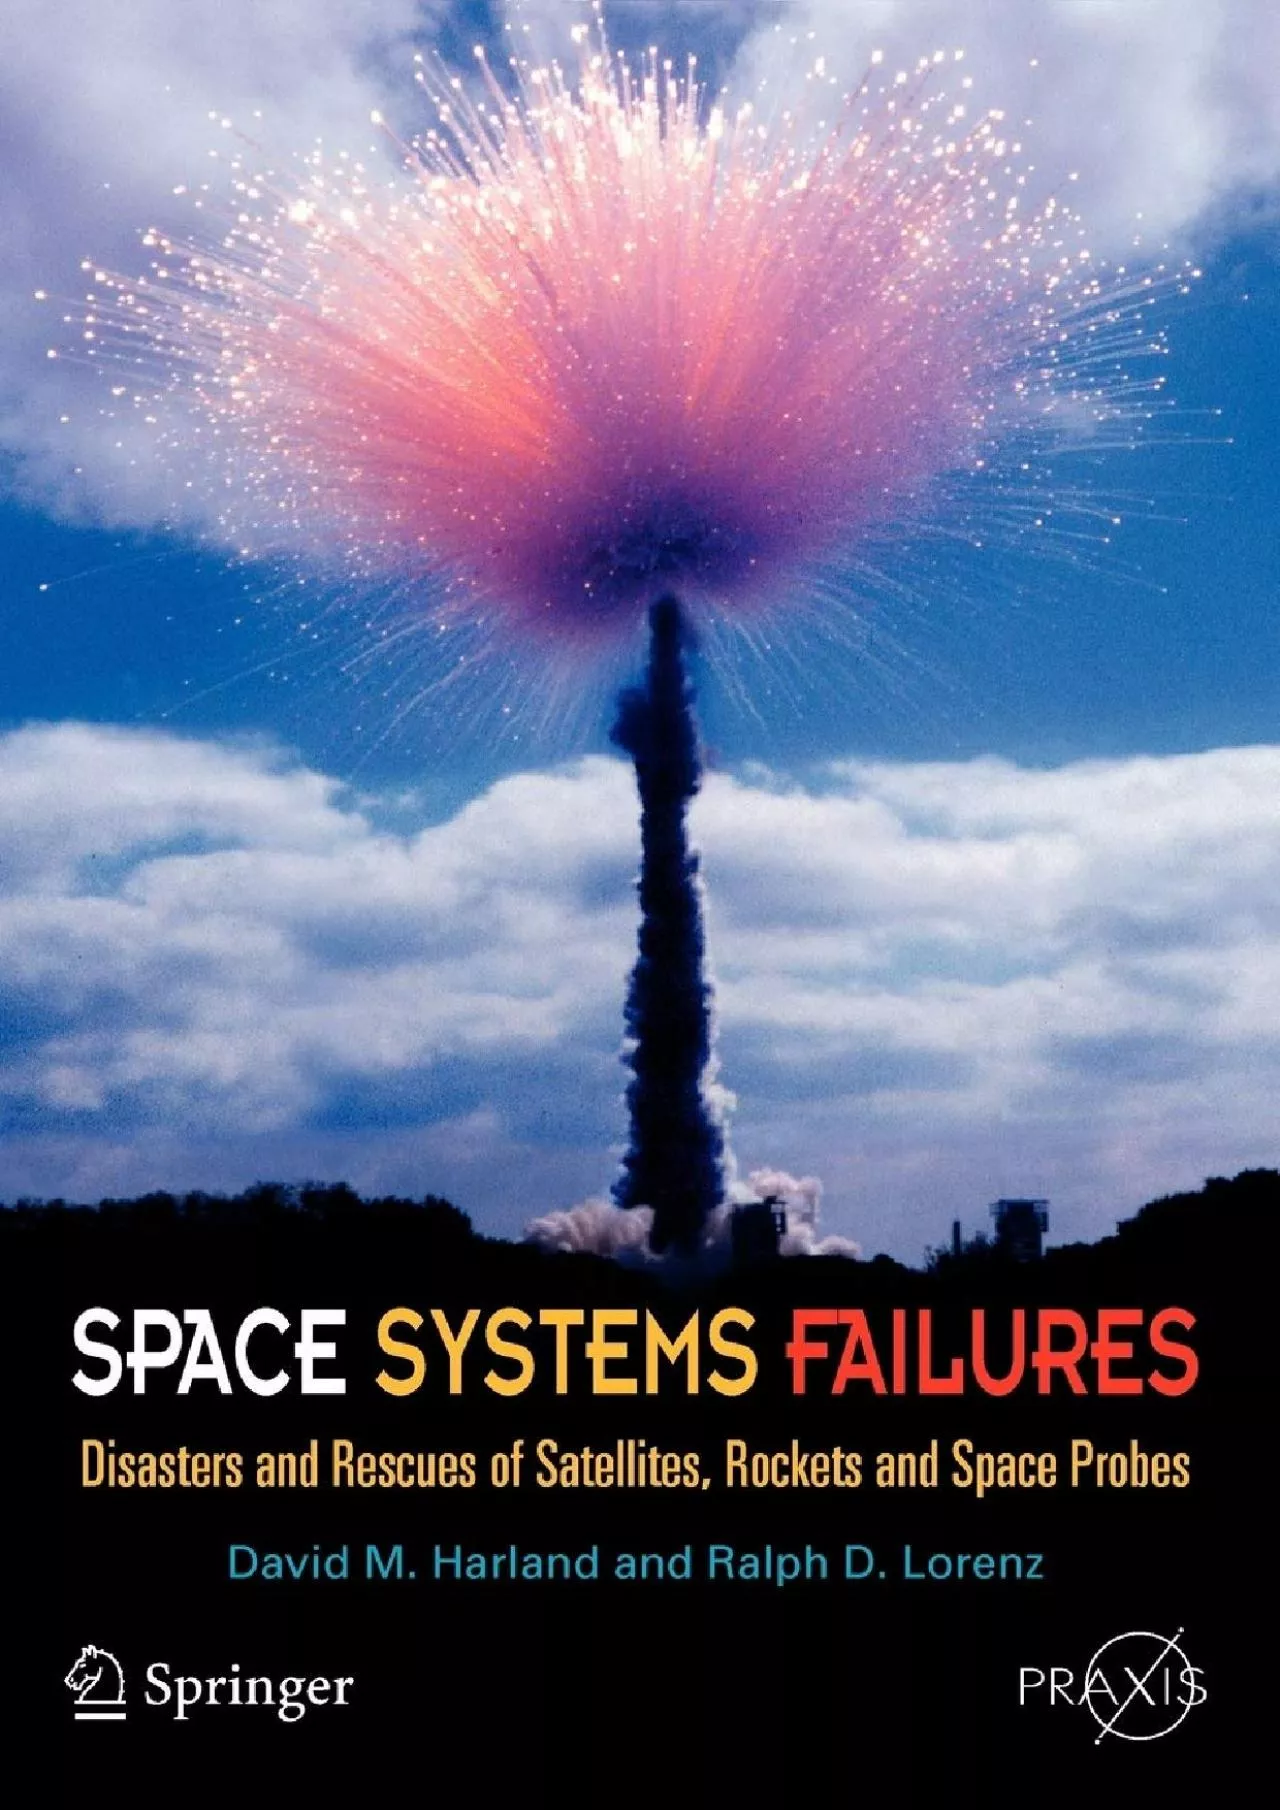 (DOWNLOAD)-Space Systems Failures: Disasters and Rescues of Satellites, Rocket and Space